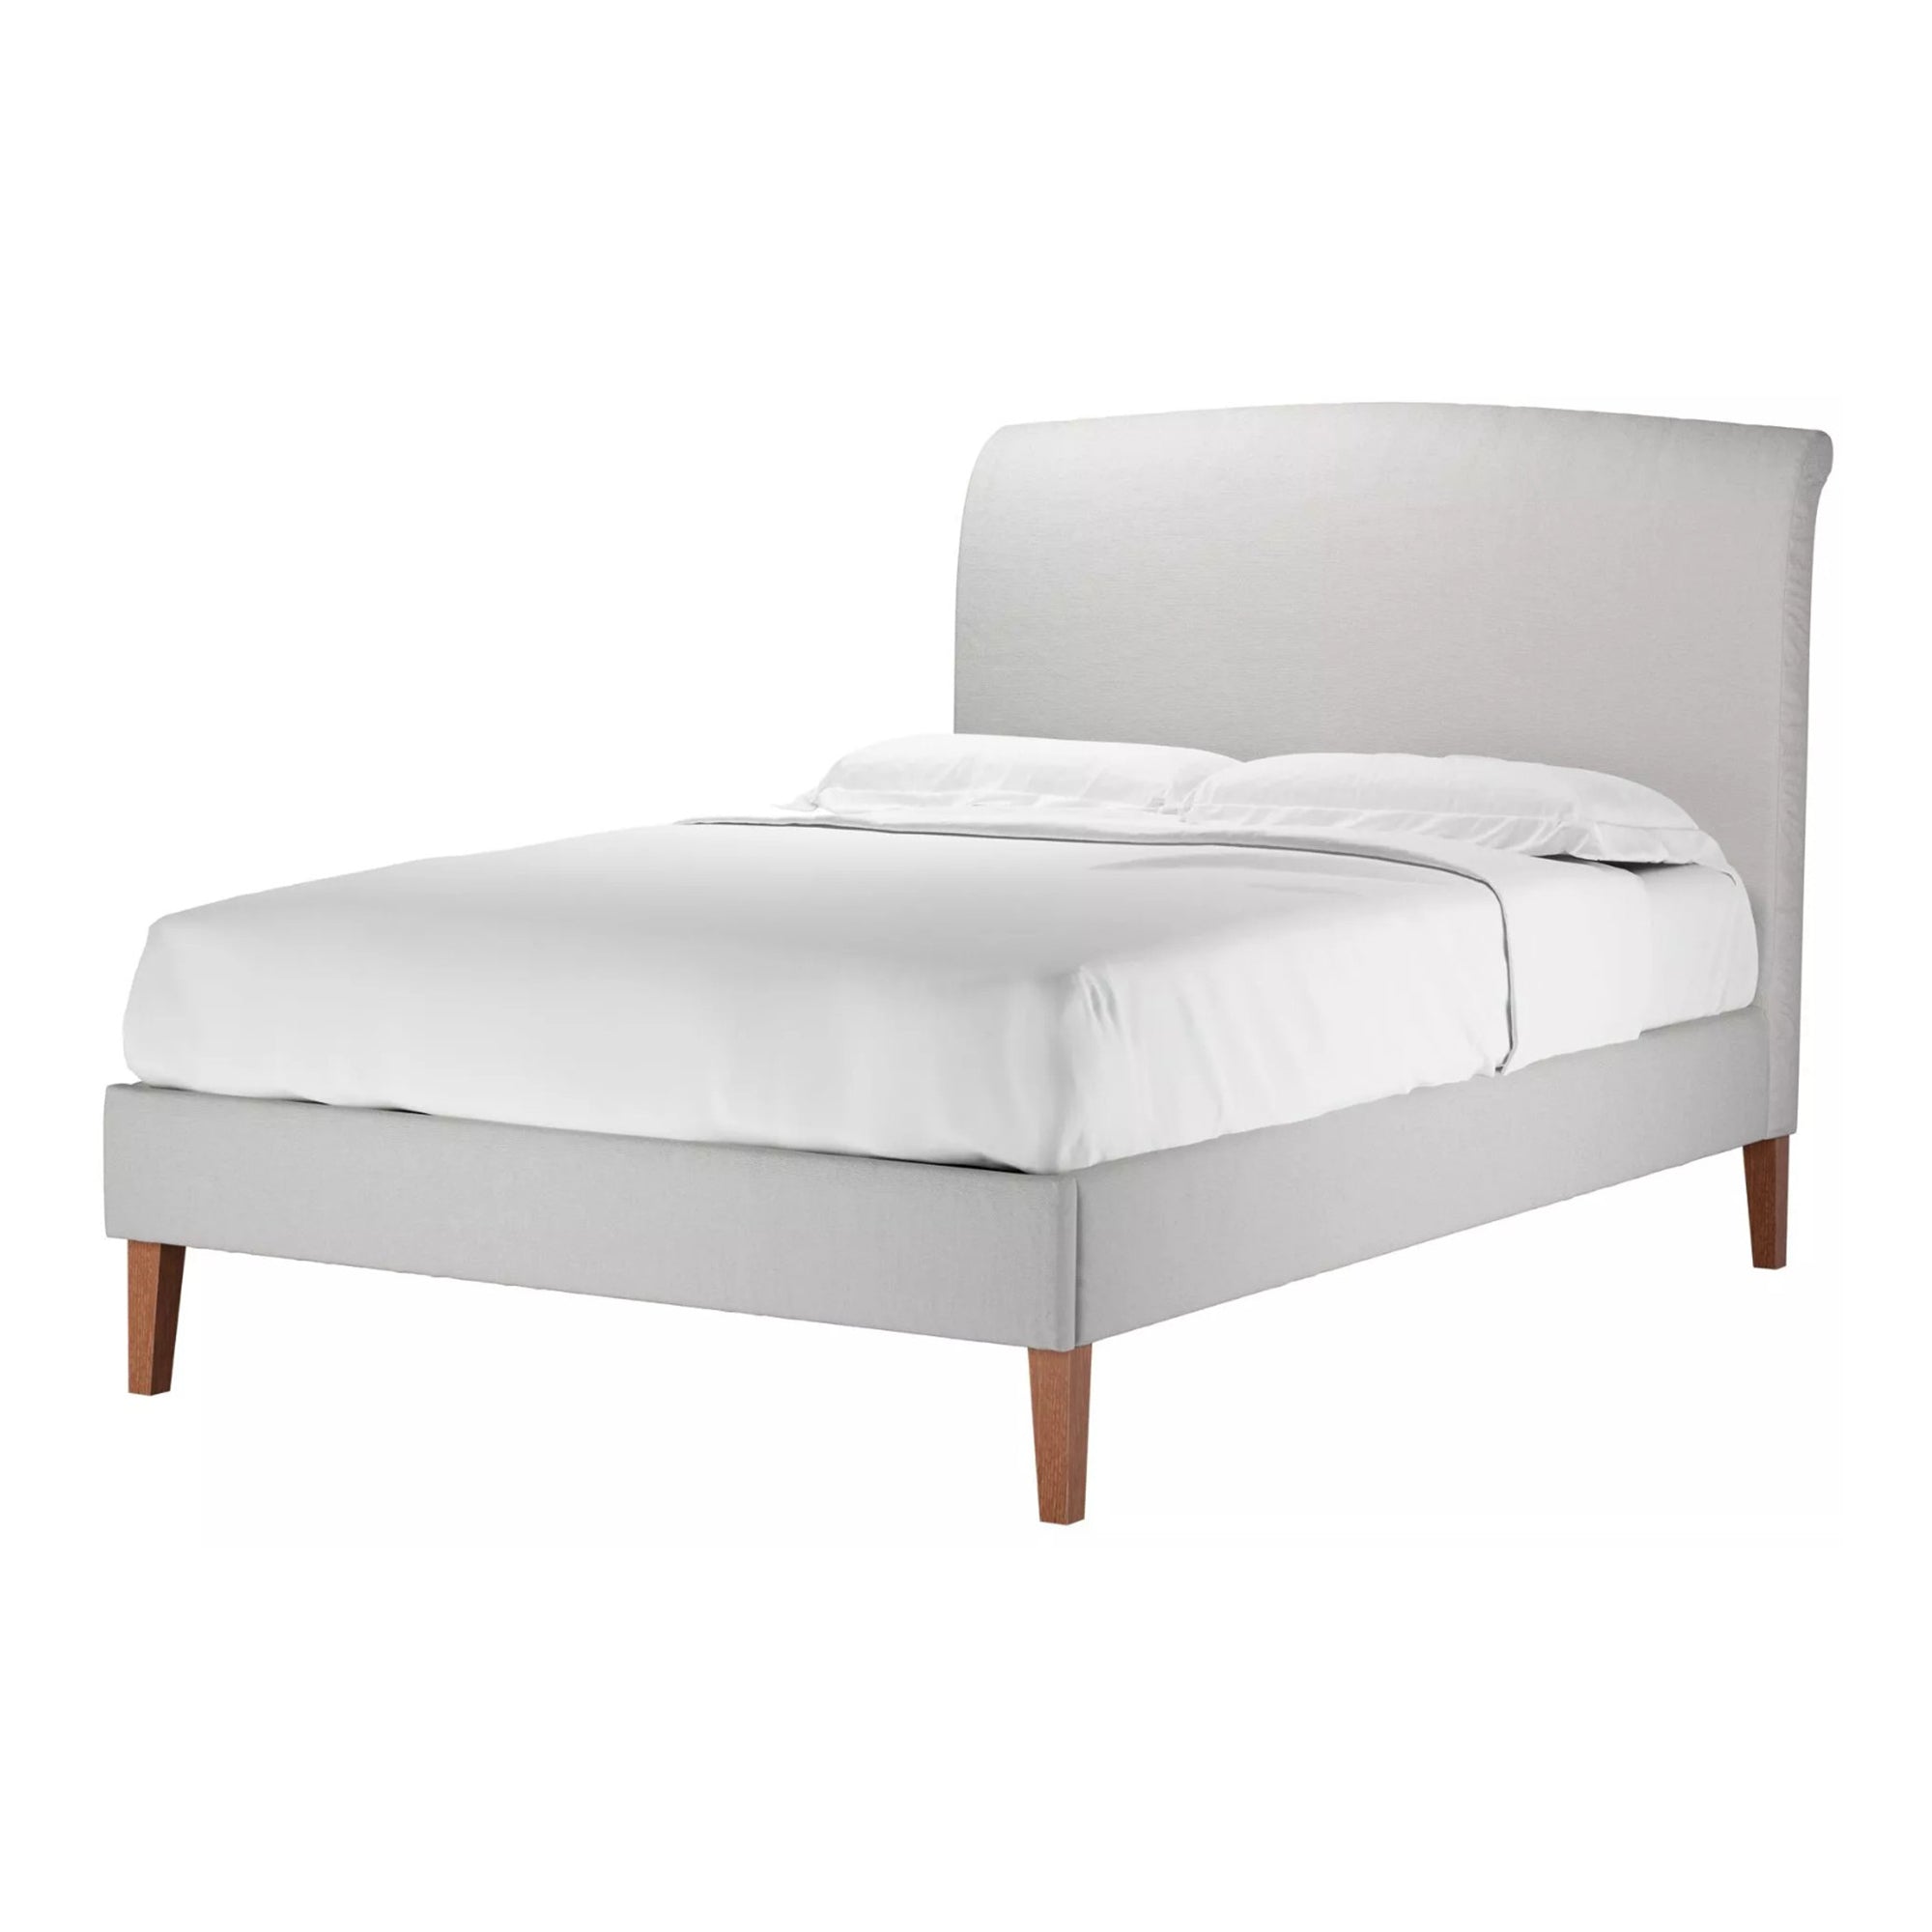 Thea Alabaster Brushed Linen Cotton Bed - Double Size